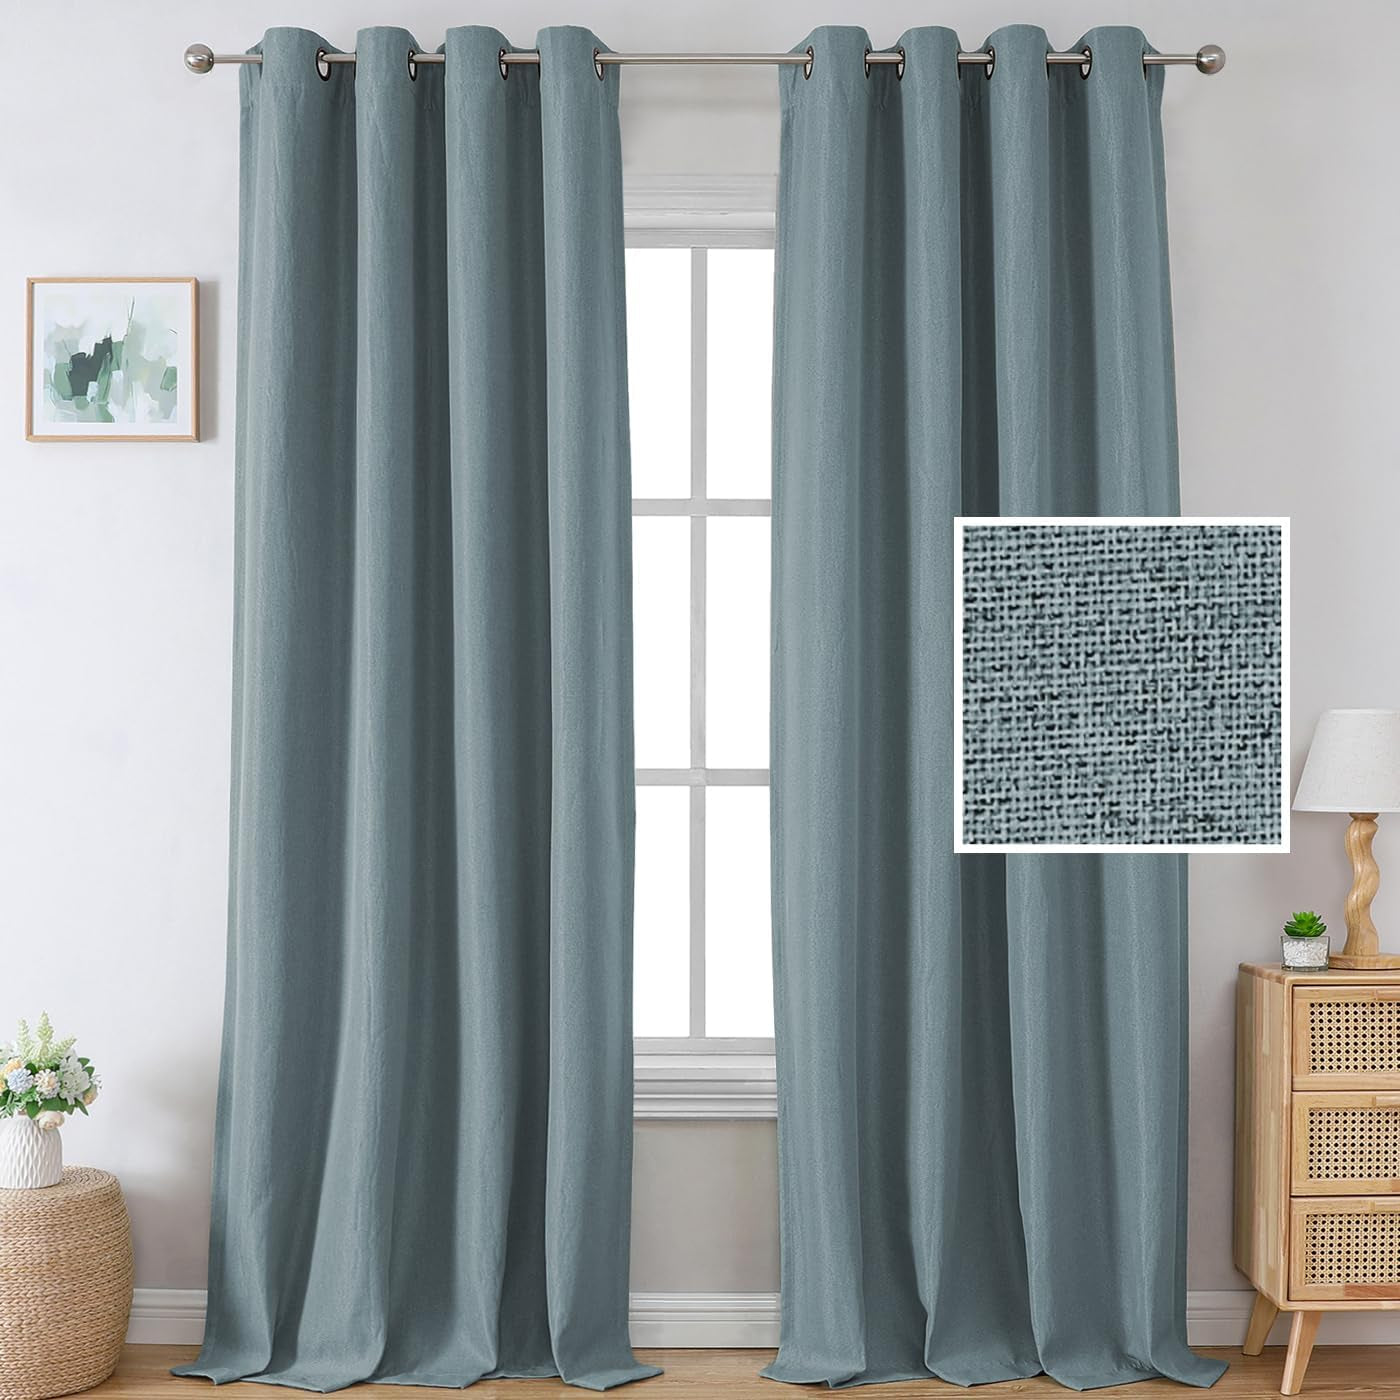 H.VERSAILTEX Linen Blackout Curtains 84 Inches Long Thermal Insulated Room Darkening Linen Curtains for Bedroom Textured Burlap Grommet Window Curtains for Living Room, Bluestone and Taupe, 2 Panels  H.VERSAILTEX Stone Blue 52"W X 96"L 